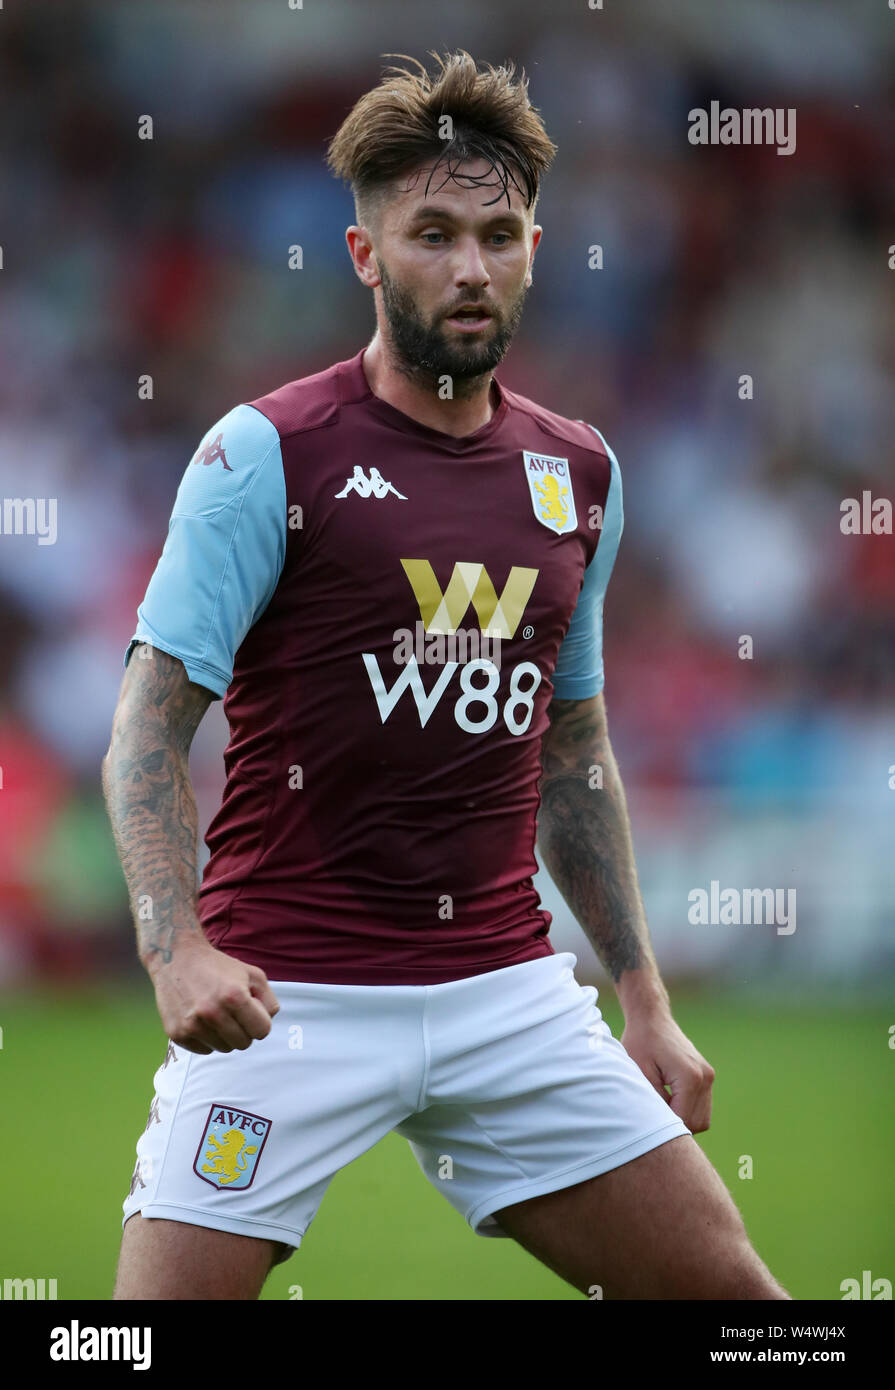 Aston Villa's Henri Lansbury during the pre-season friendly match at the Banks's Stadium, Walsall. PRESS ASSOCIATION Photo. Picture date: Wednesday July 24, 2019. See PA story SOCCER Walsall. Photo credit should read: Nick Potts/PA Wire. RESTRICTIONS: No use with unauthorised audio, video, data, fixture lists, club/league logos or 'live' services. Online in-match use limited to 120 images, no video emulation. No use in betting, games or single club/league/player publications. Stock Photo